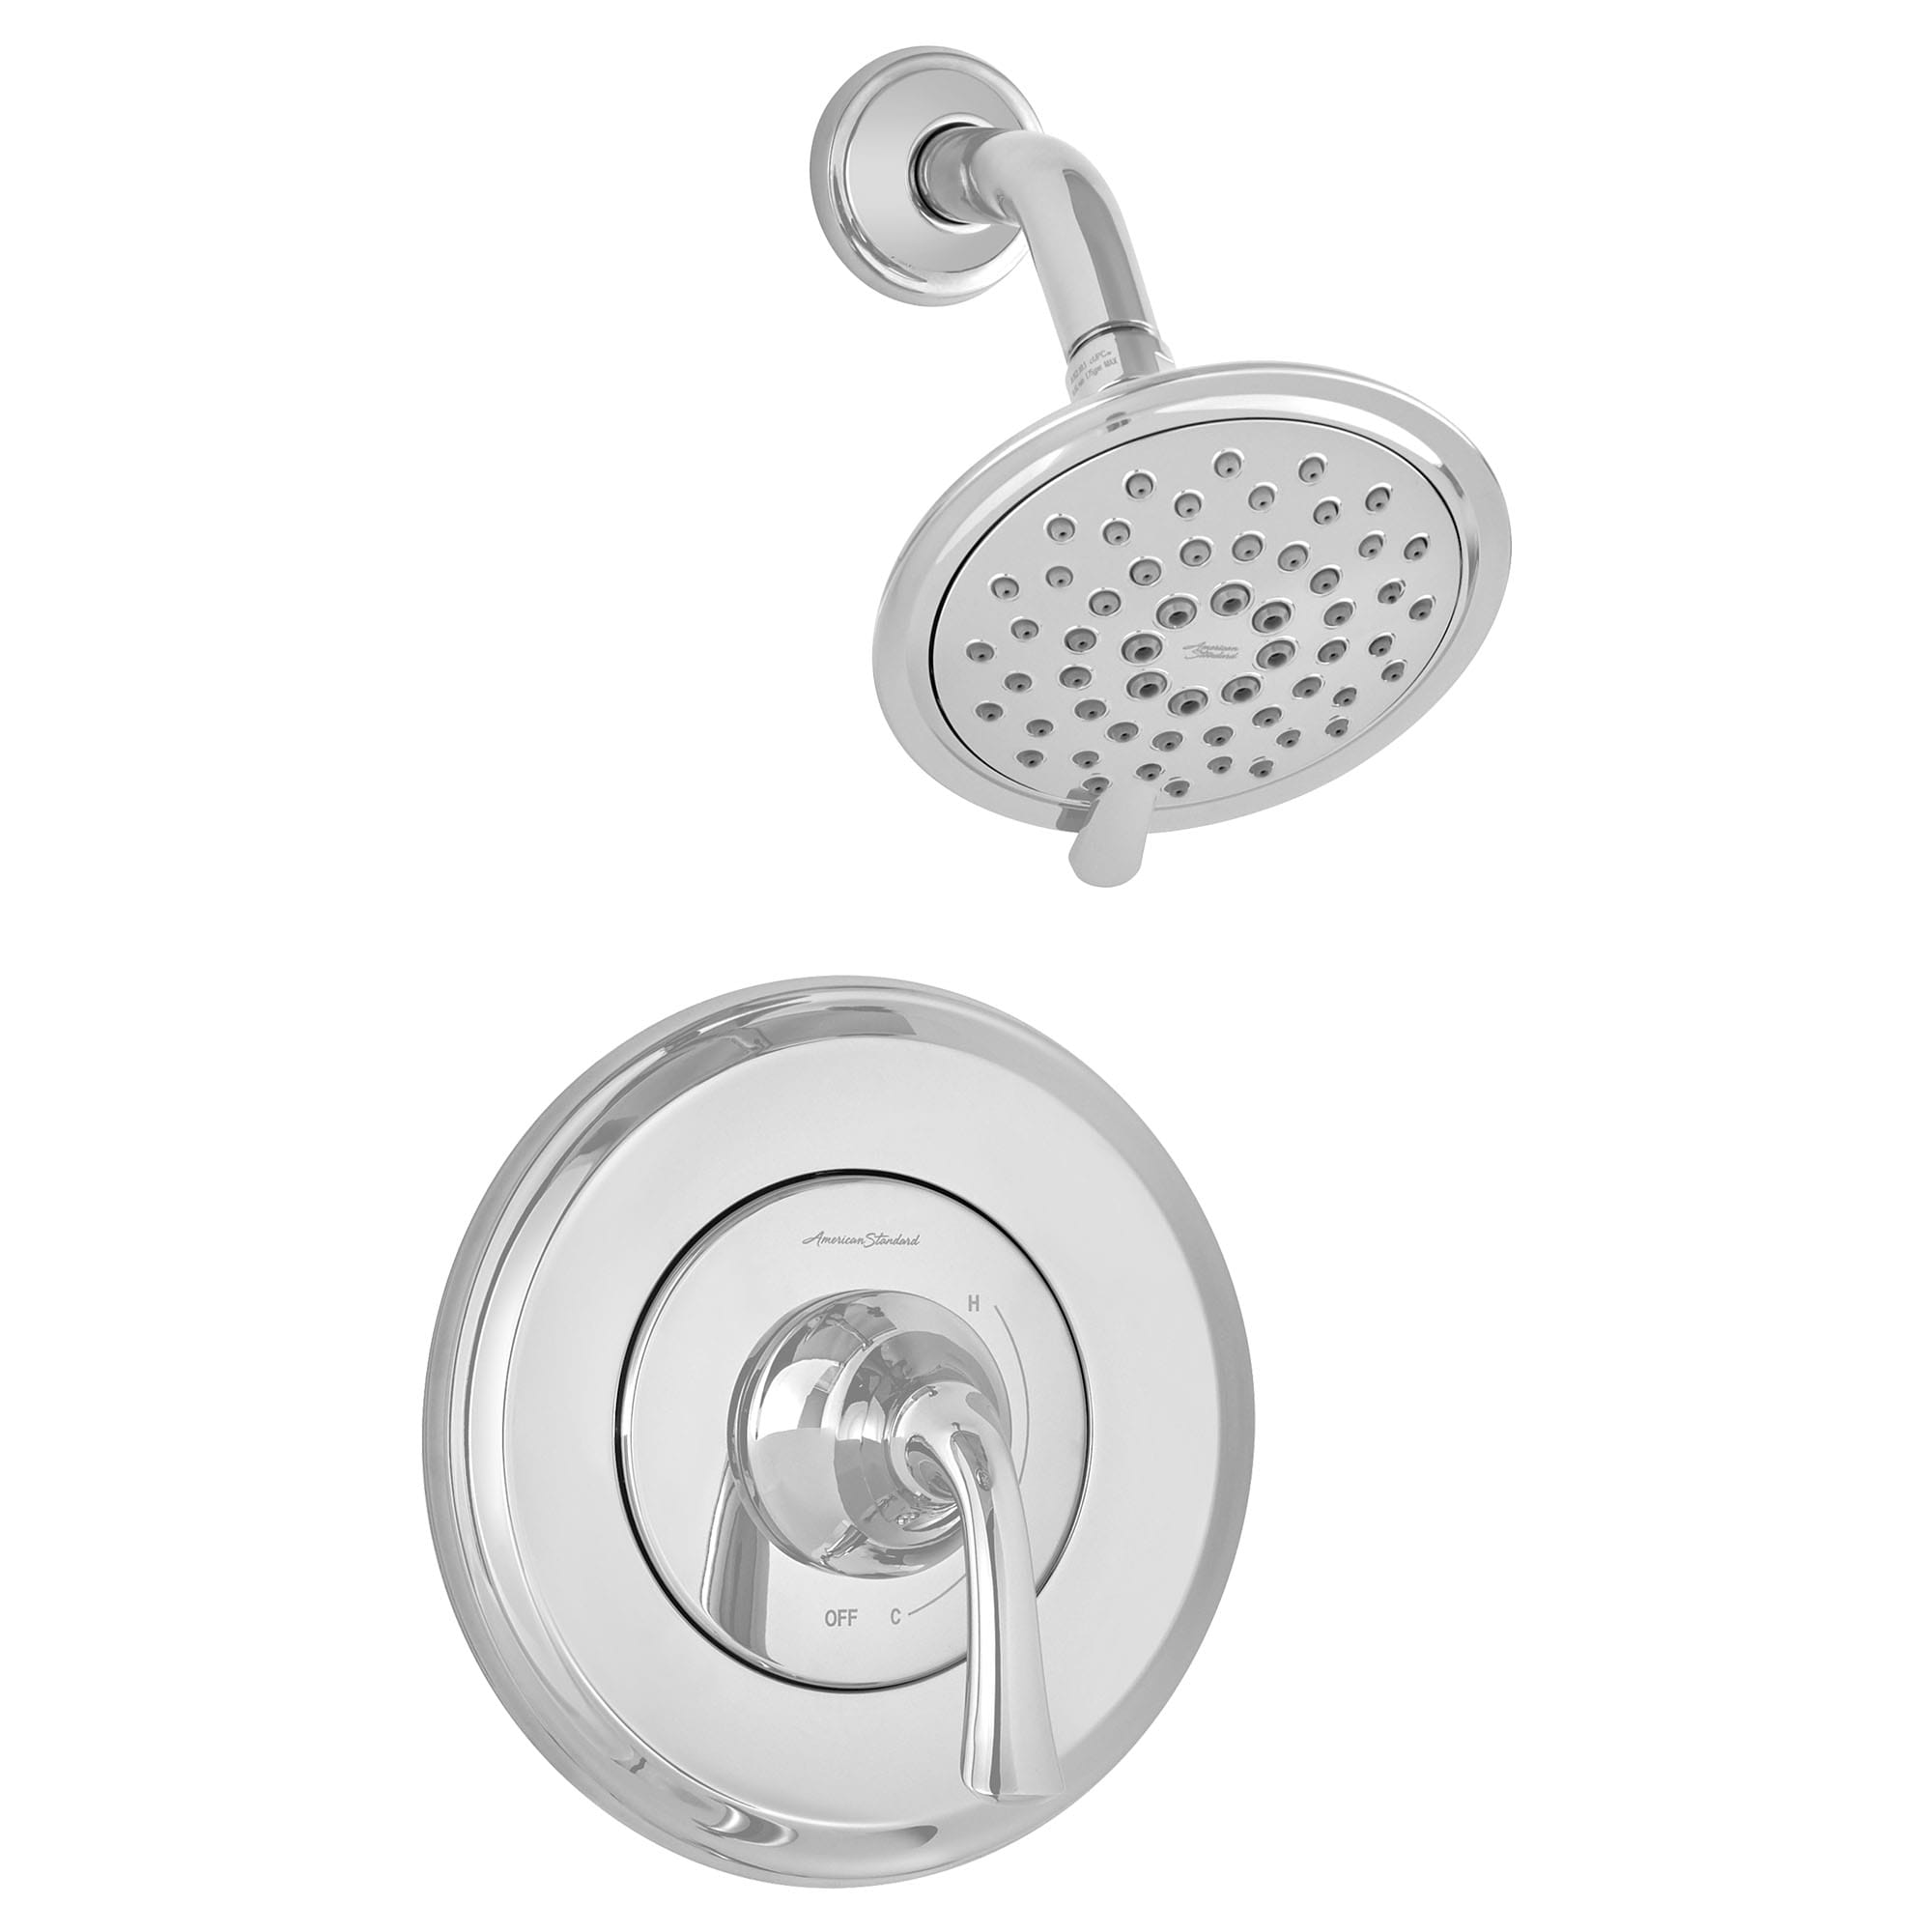 Patience® 1.8 gpm/6.6 L/min Shower Trim Kit With Water-Saving 3-Function Showerhead, Double Ceramic Pressure Balance Cartridge With Lever Handle